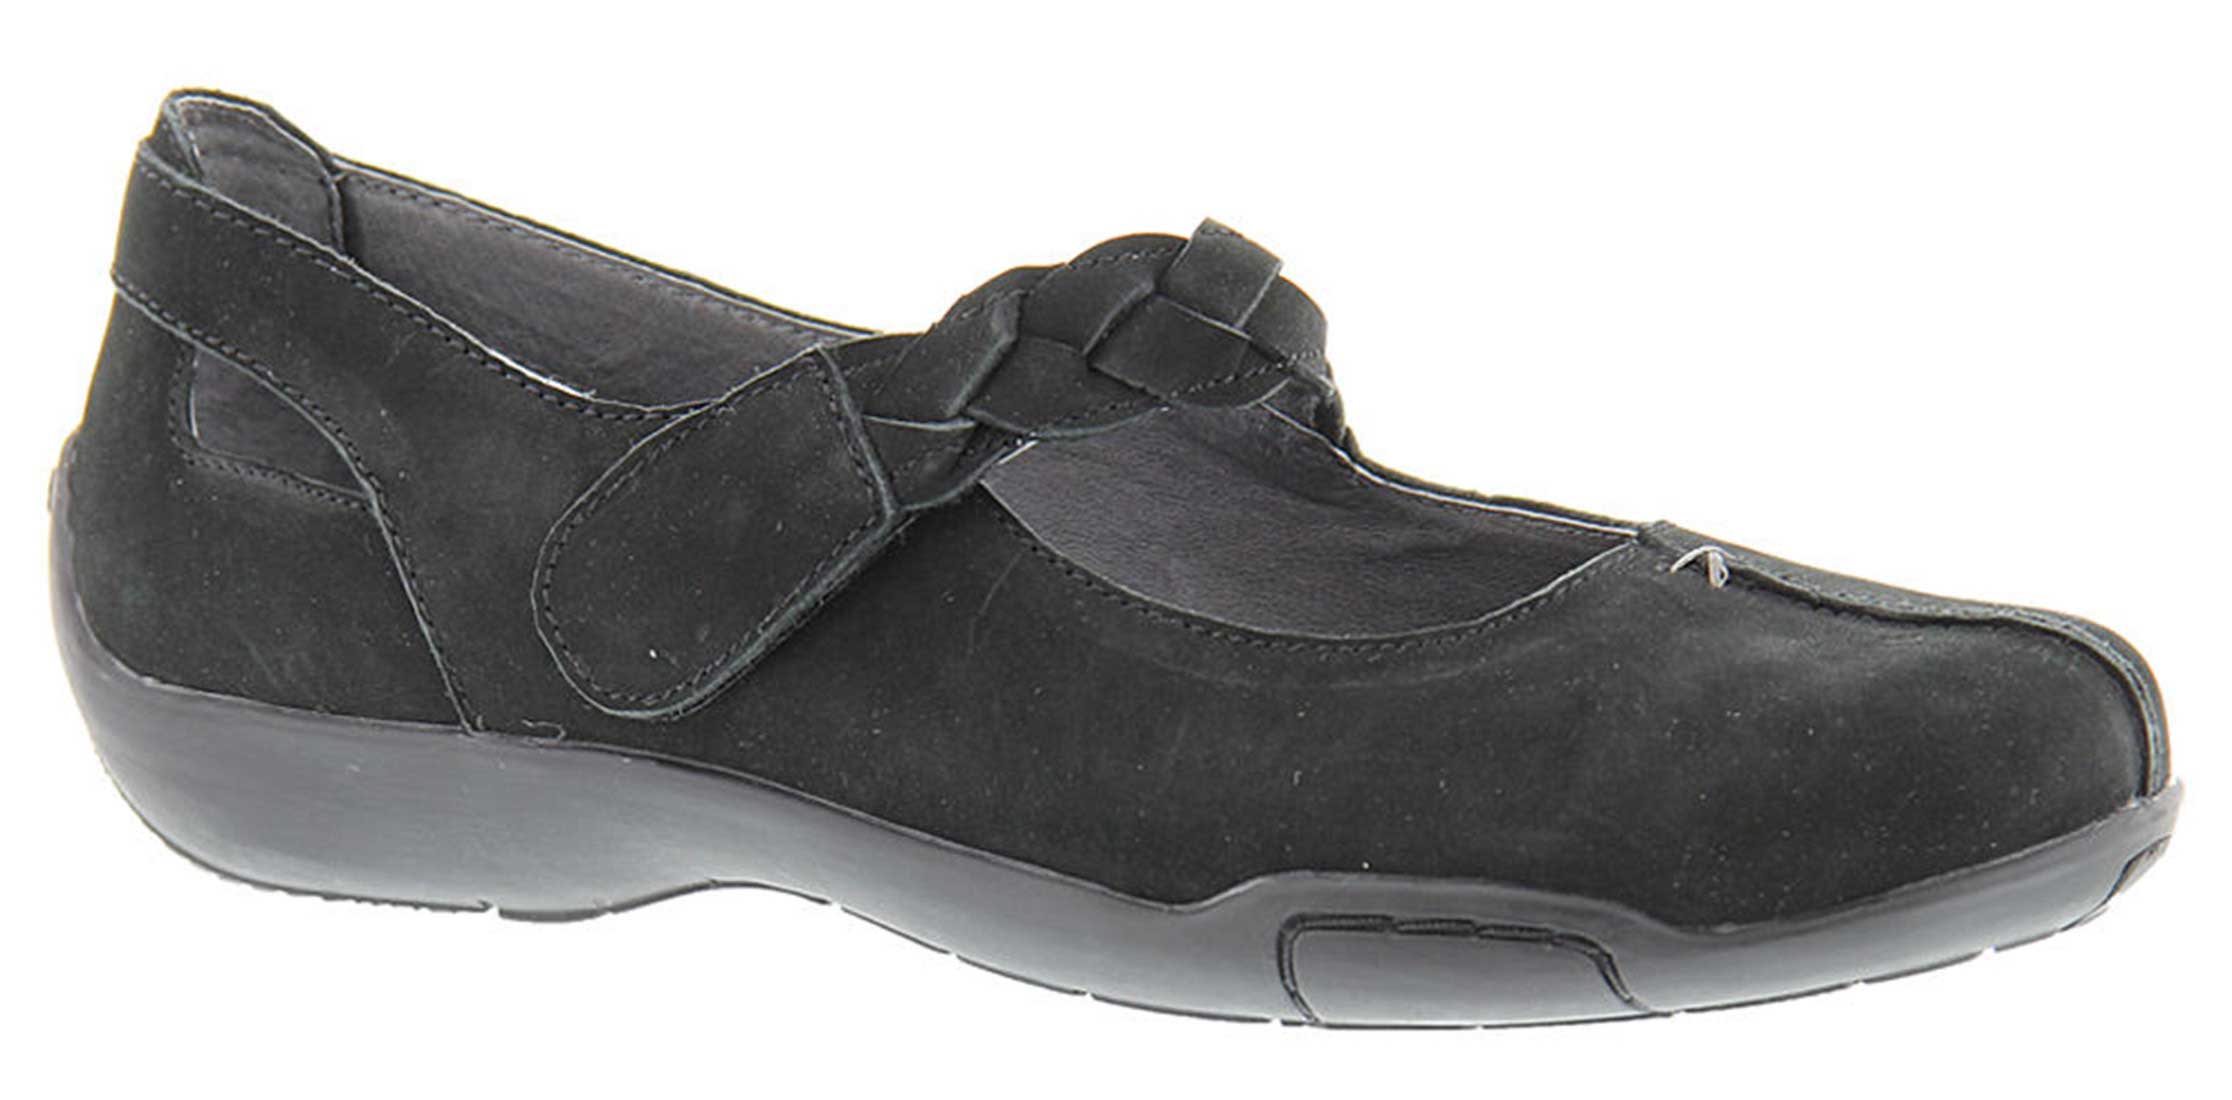 Ros Hommerson Camry 62031 - Women's Casual Comfort Shoe - X-Narrow - X-Wide